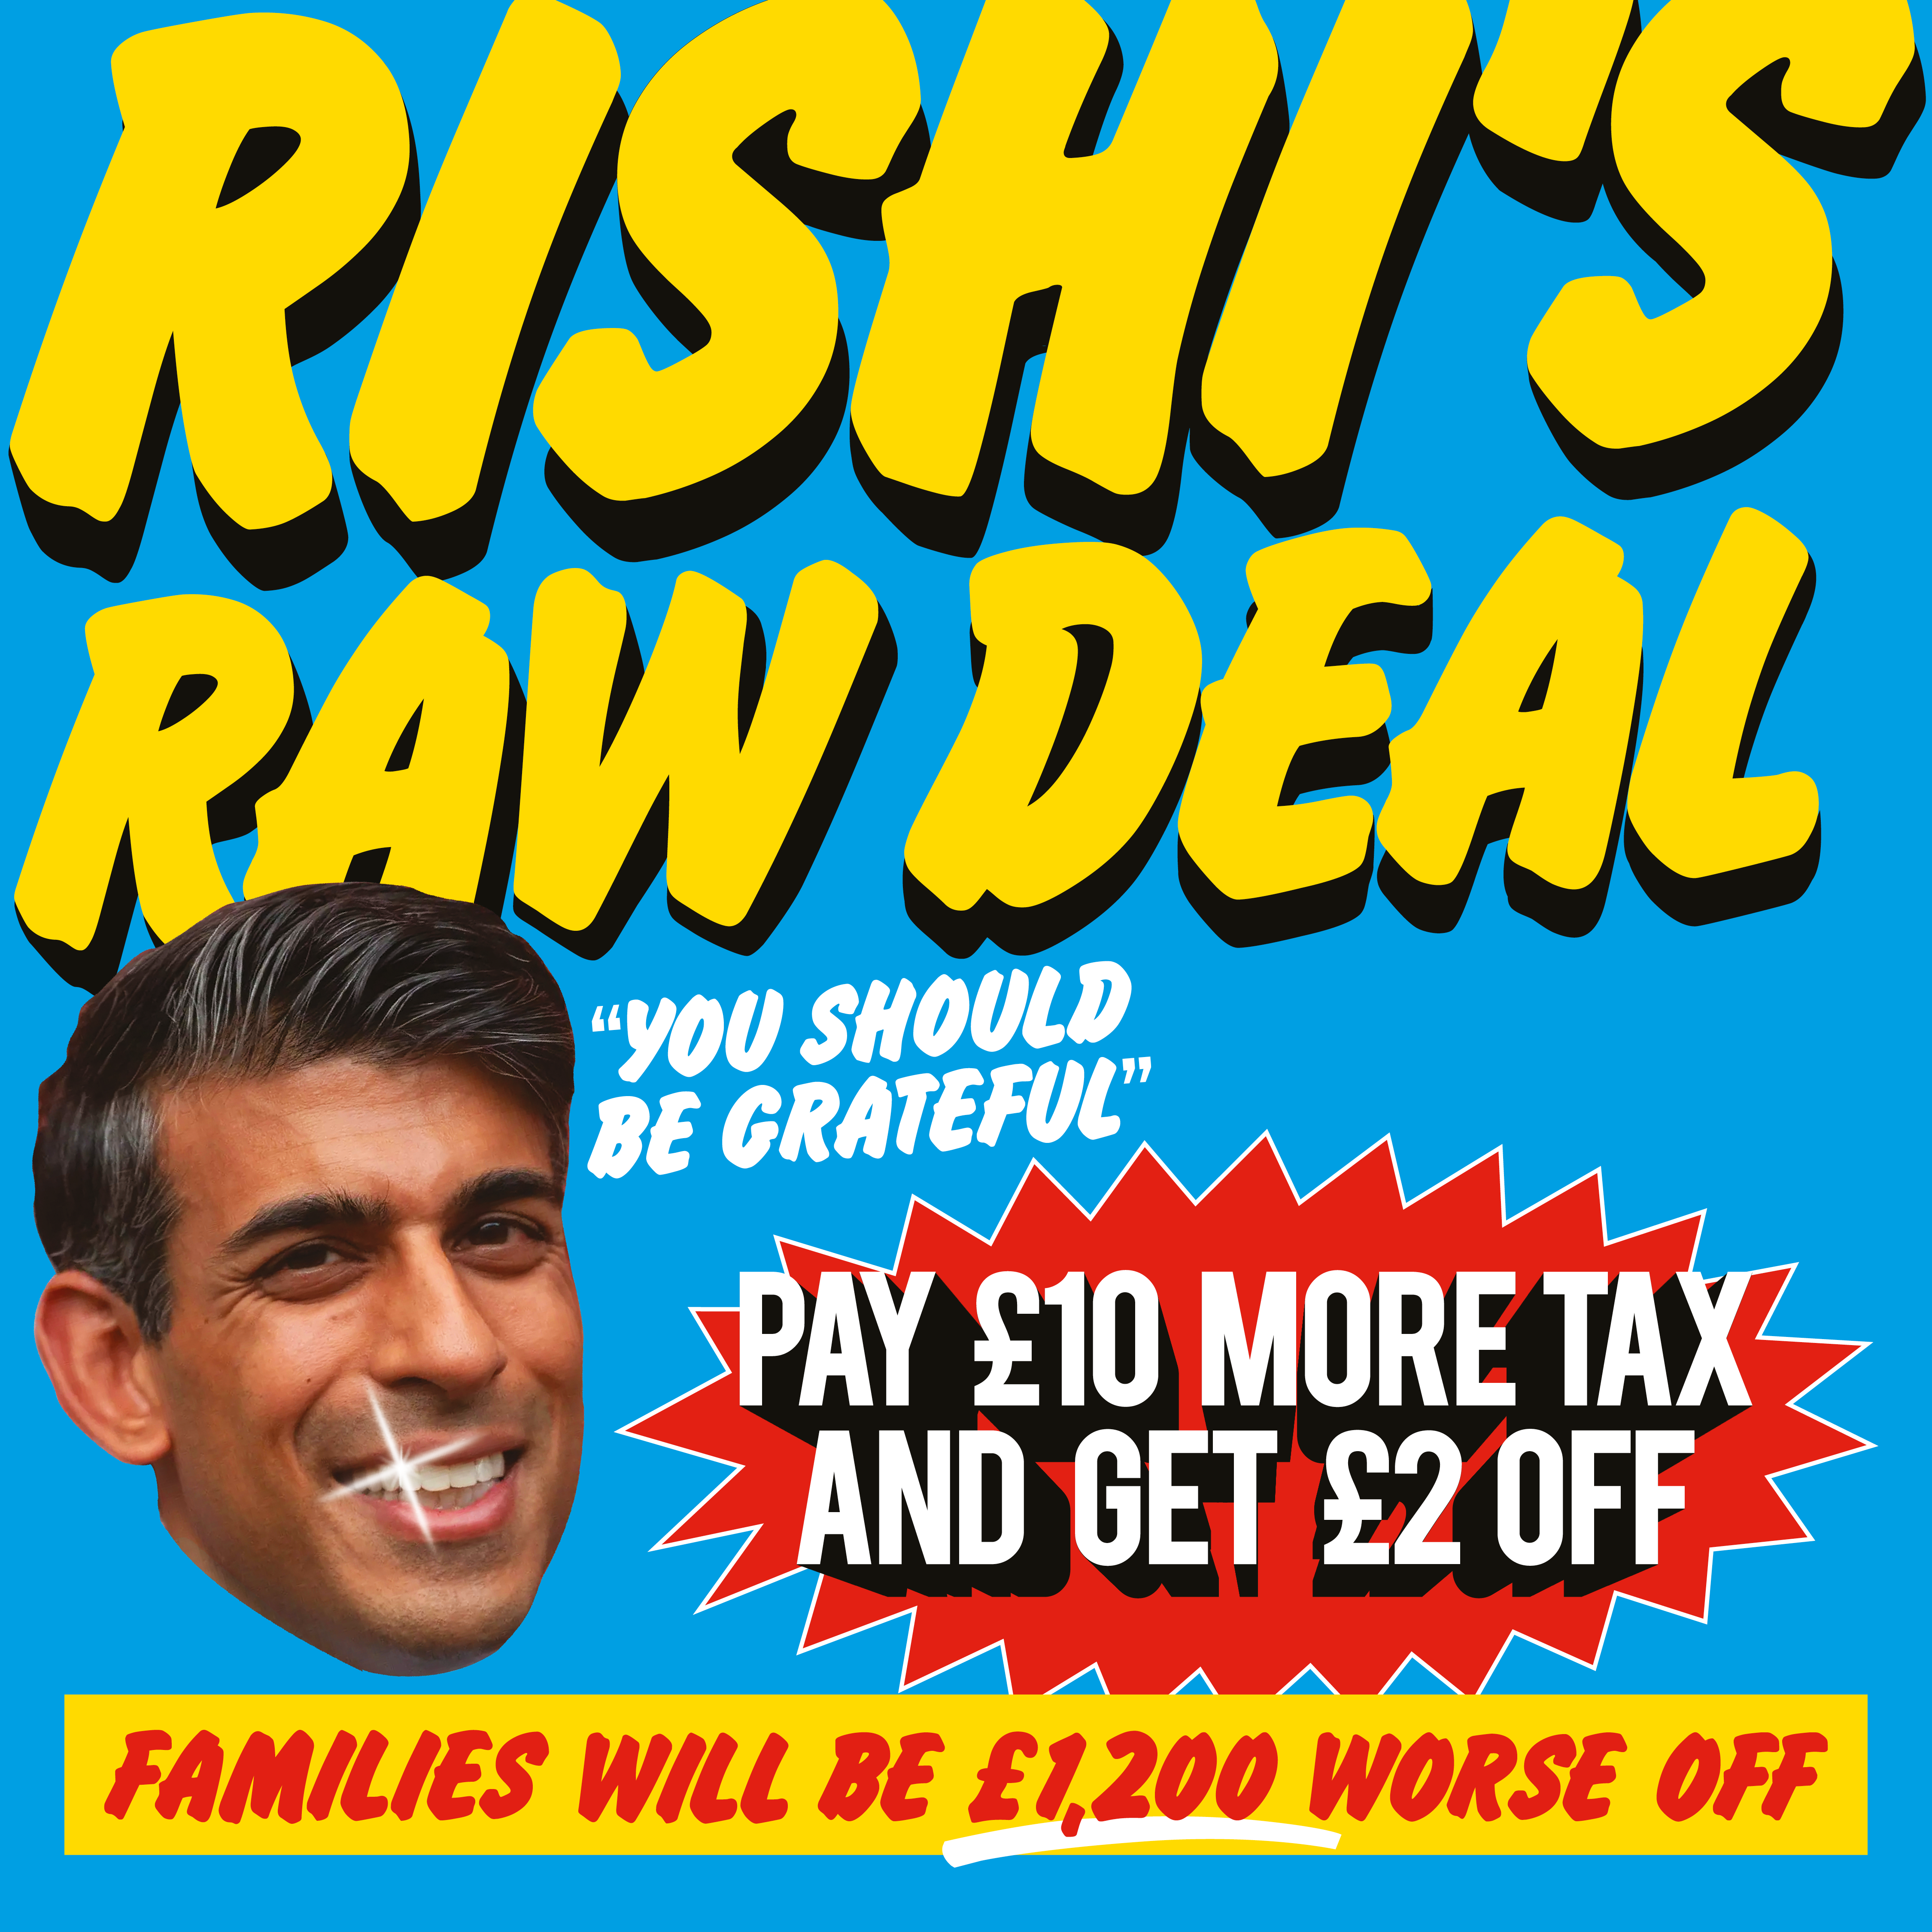 Labour has accused Rishi Sunak of offering taxpayers a ‘cynical giveaway’